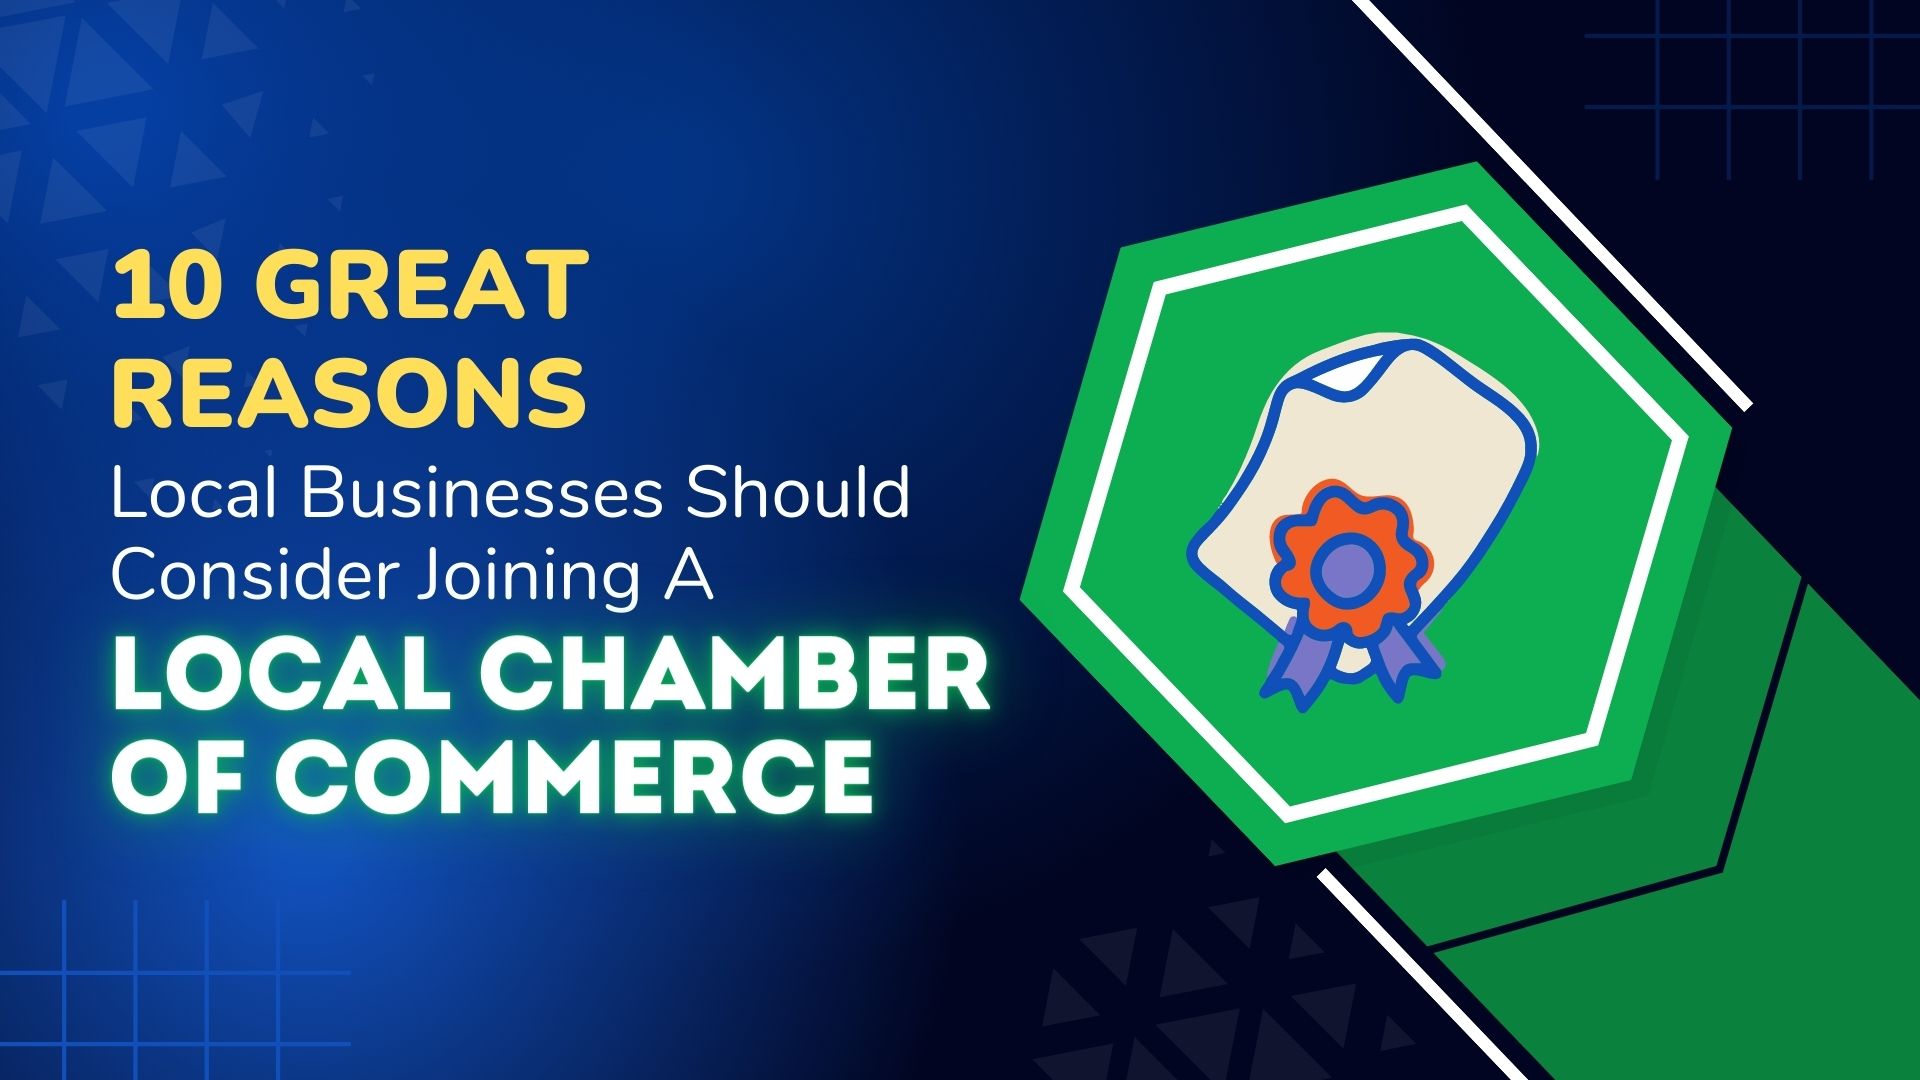 10 Reasons Local Businesses Should Consider Joining a Chamber of Commerce